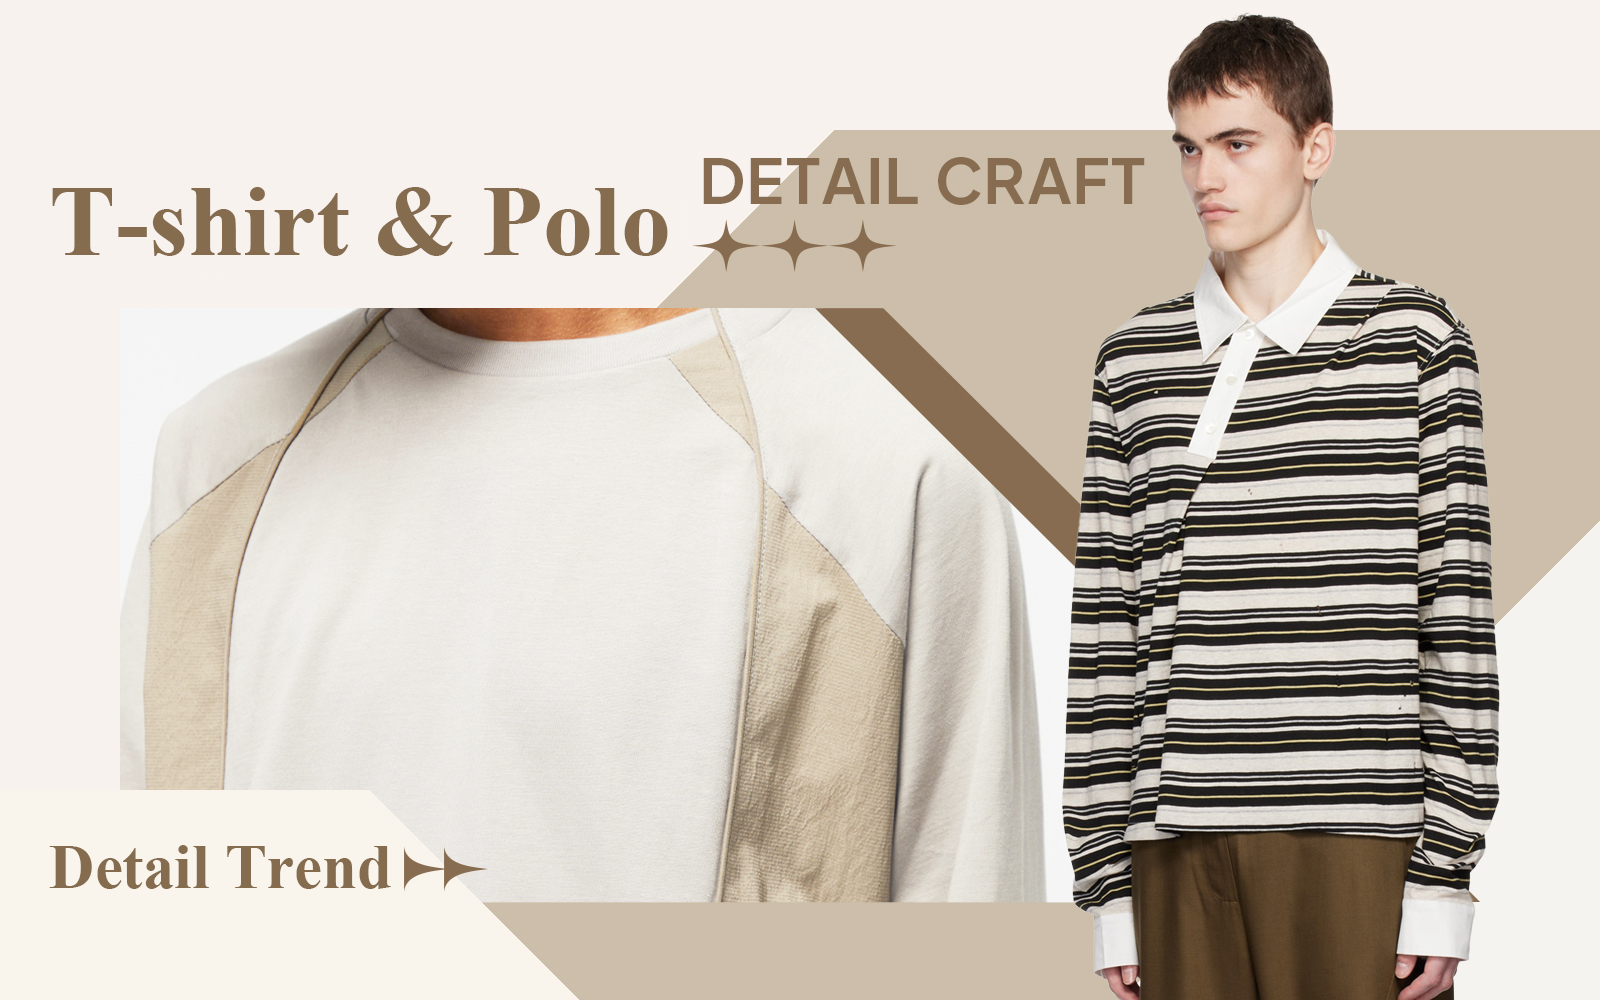 Smart Casual -- The Detail & Craft Trend for Men's T-shirt & Polo Shirt